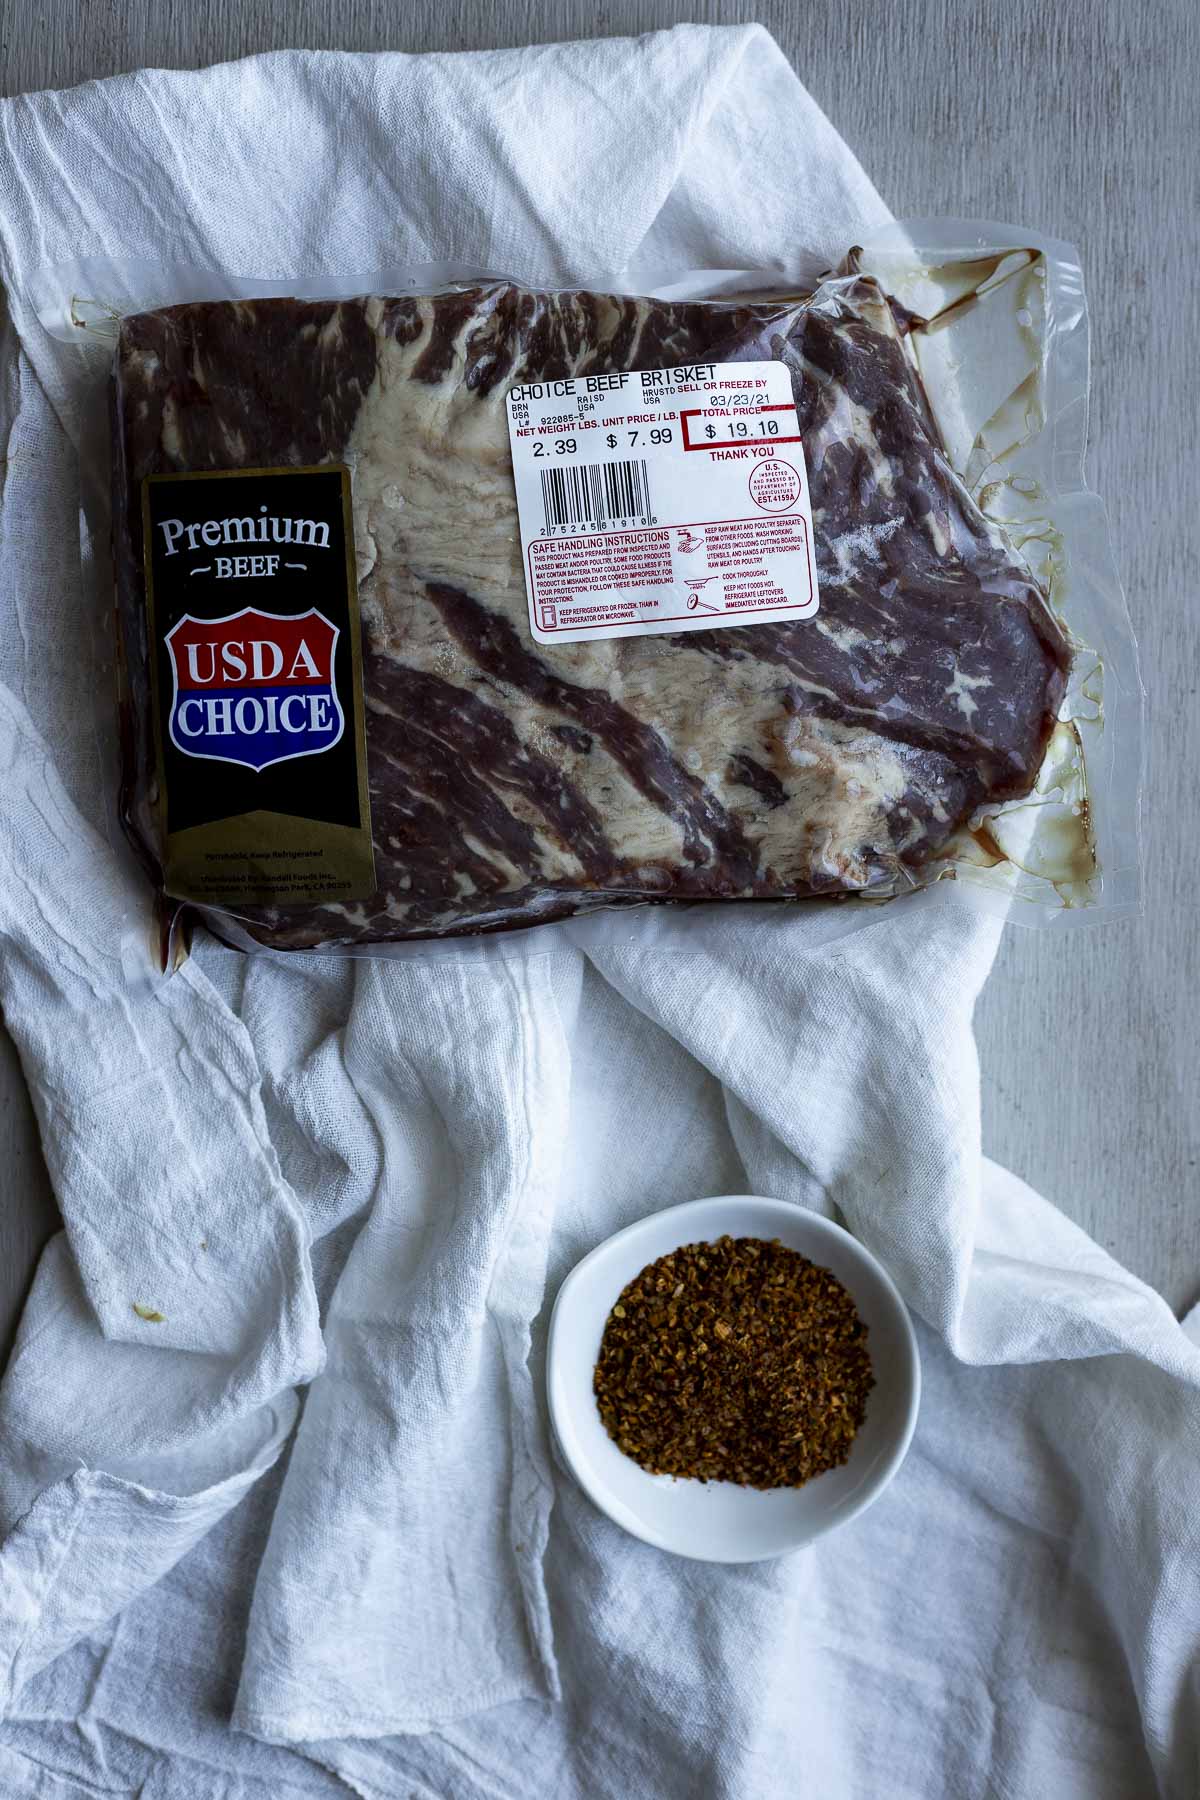 Brisket in packaging and a bowl of seasoning on a white cloth.